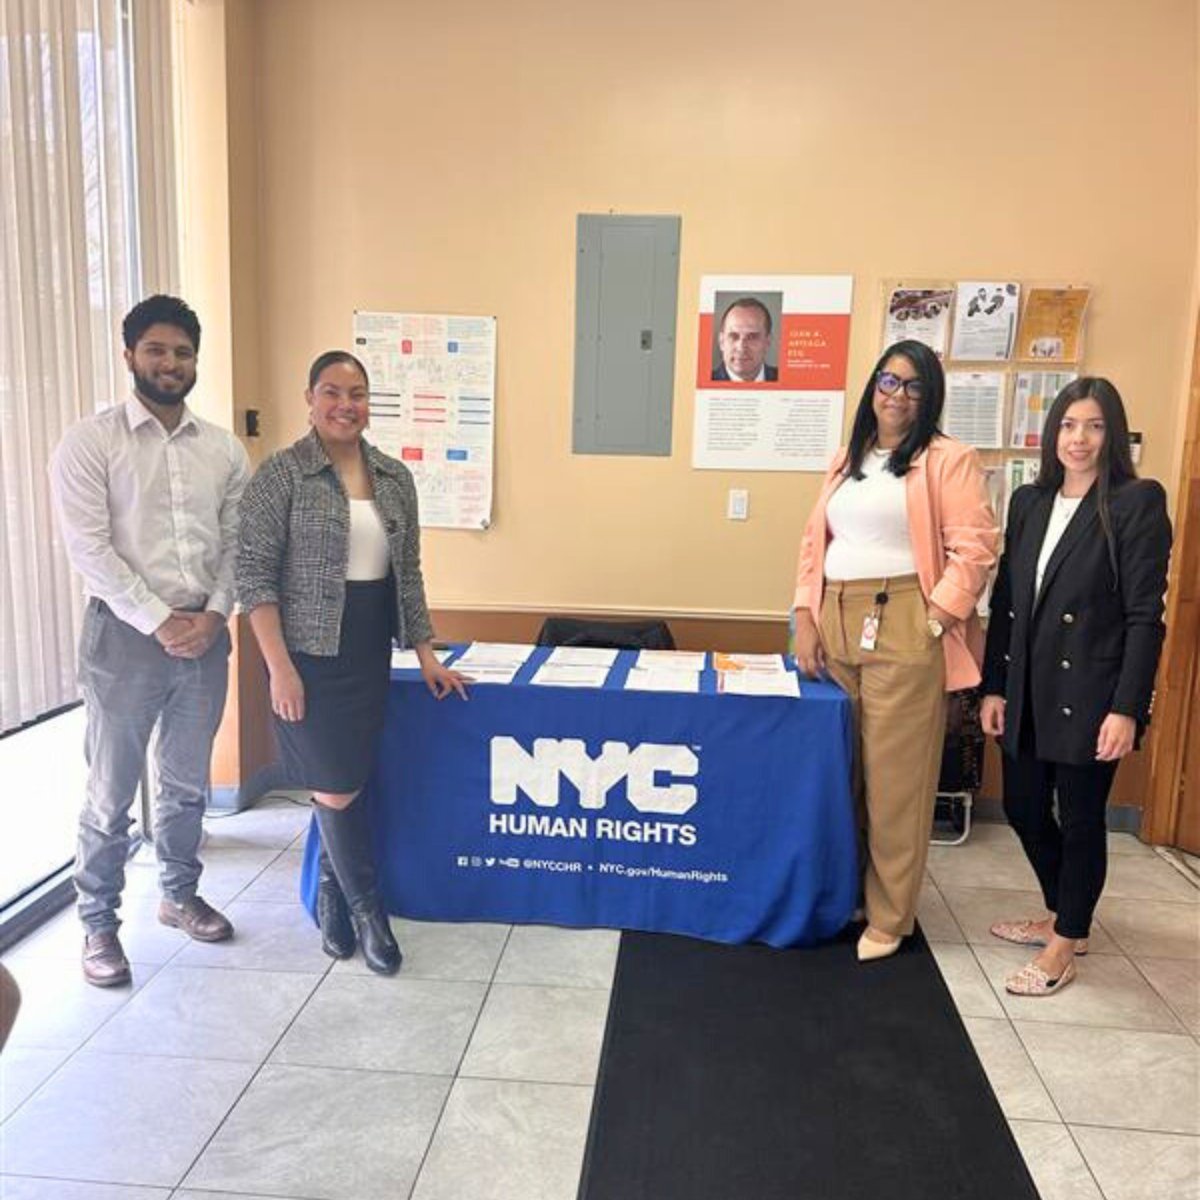 On April 25, the @NYCCHR visited our Bronx office. We would like to express our gratitude and appreciation for their visit. Samelys Lopez, the Associate Human Rights Specialist, provided valuable resources and information to our community members.